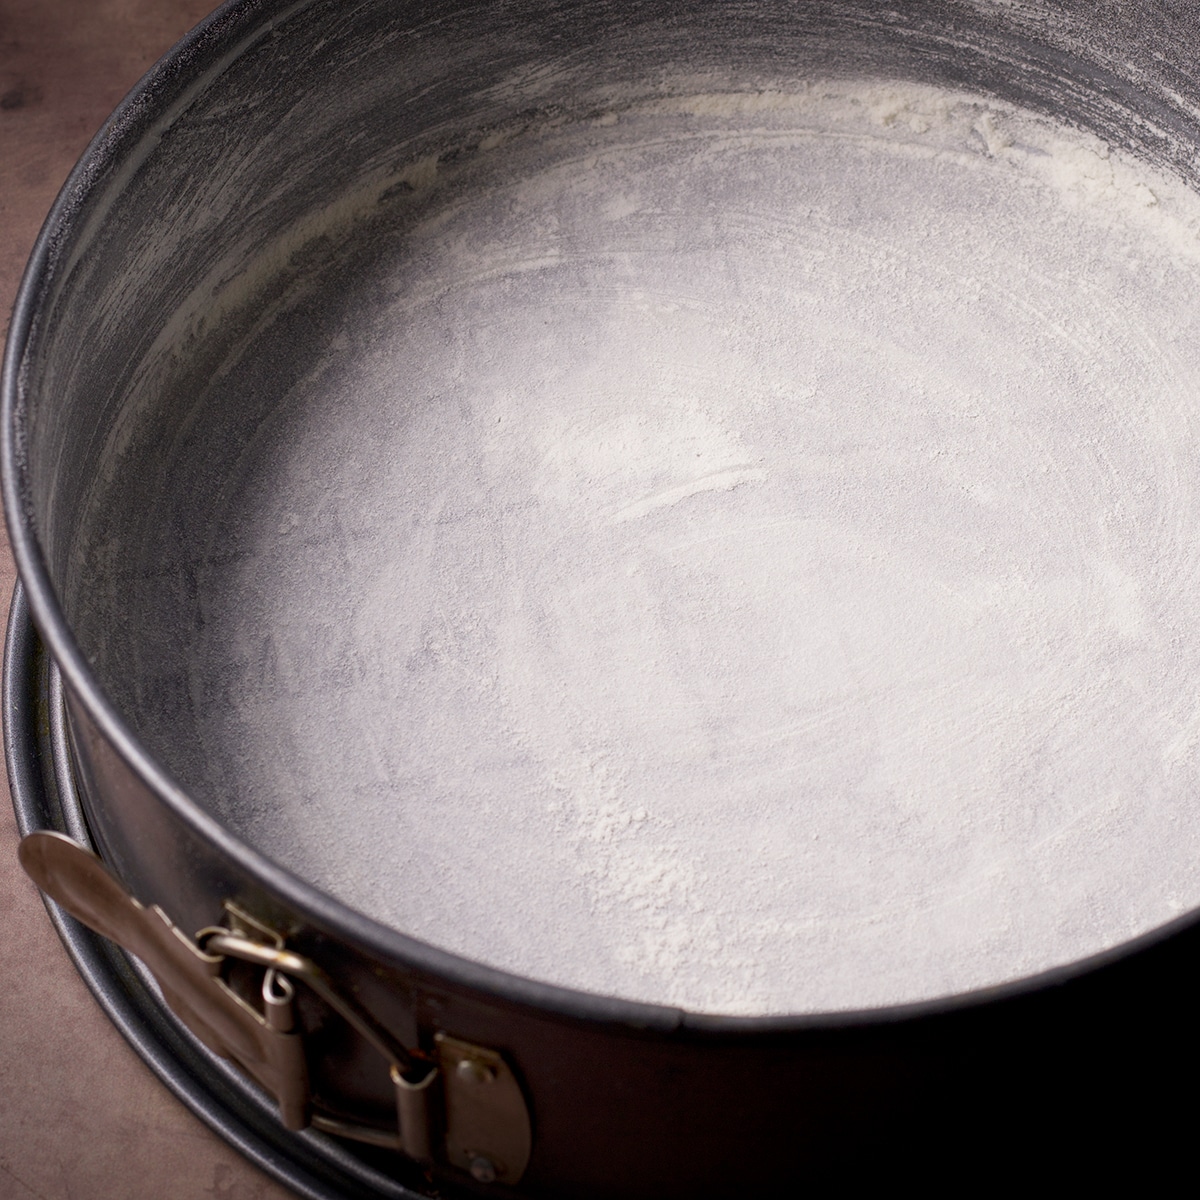 A springform pan that's been greased and floured and the bottom of the pan lined with parchment paper.